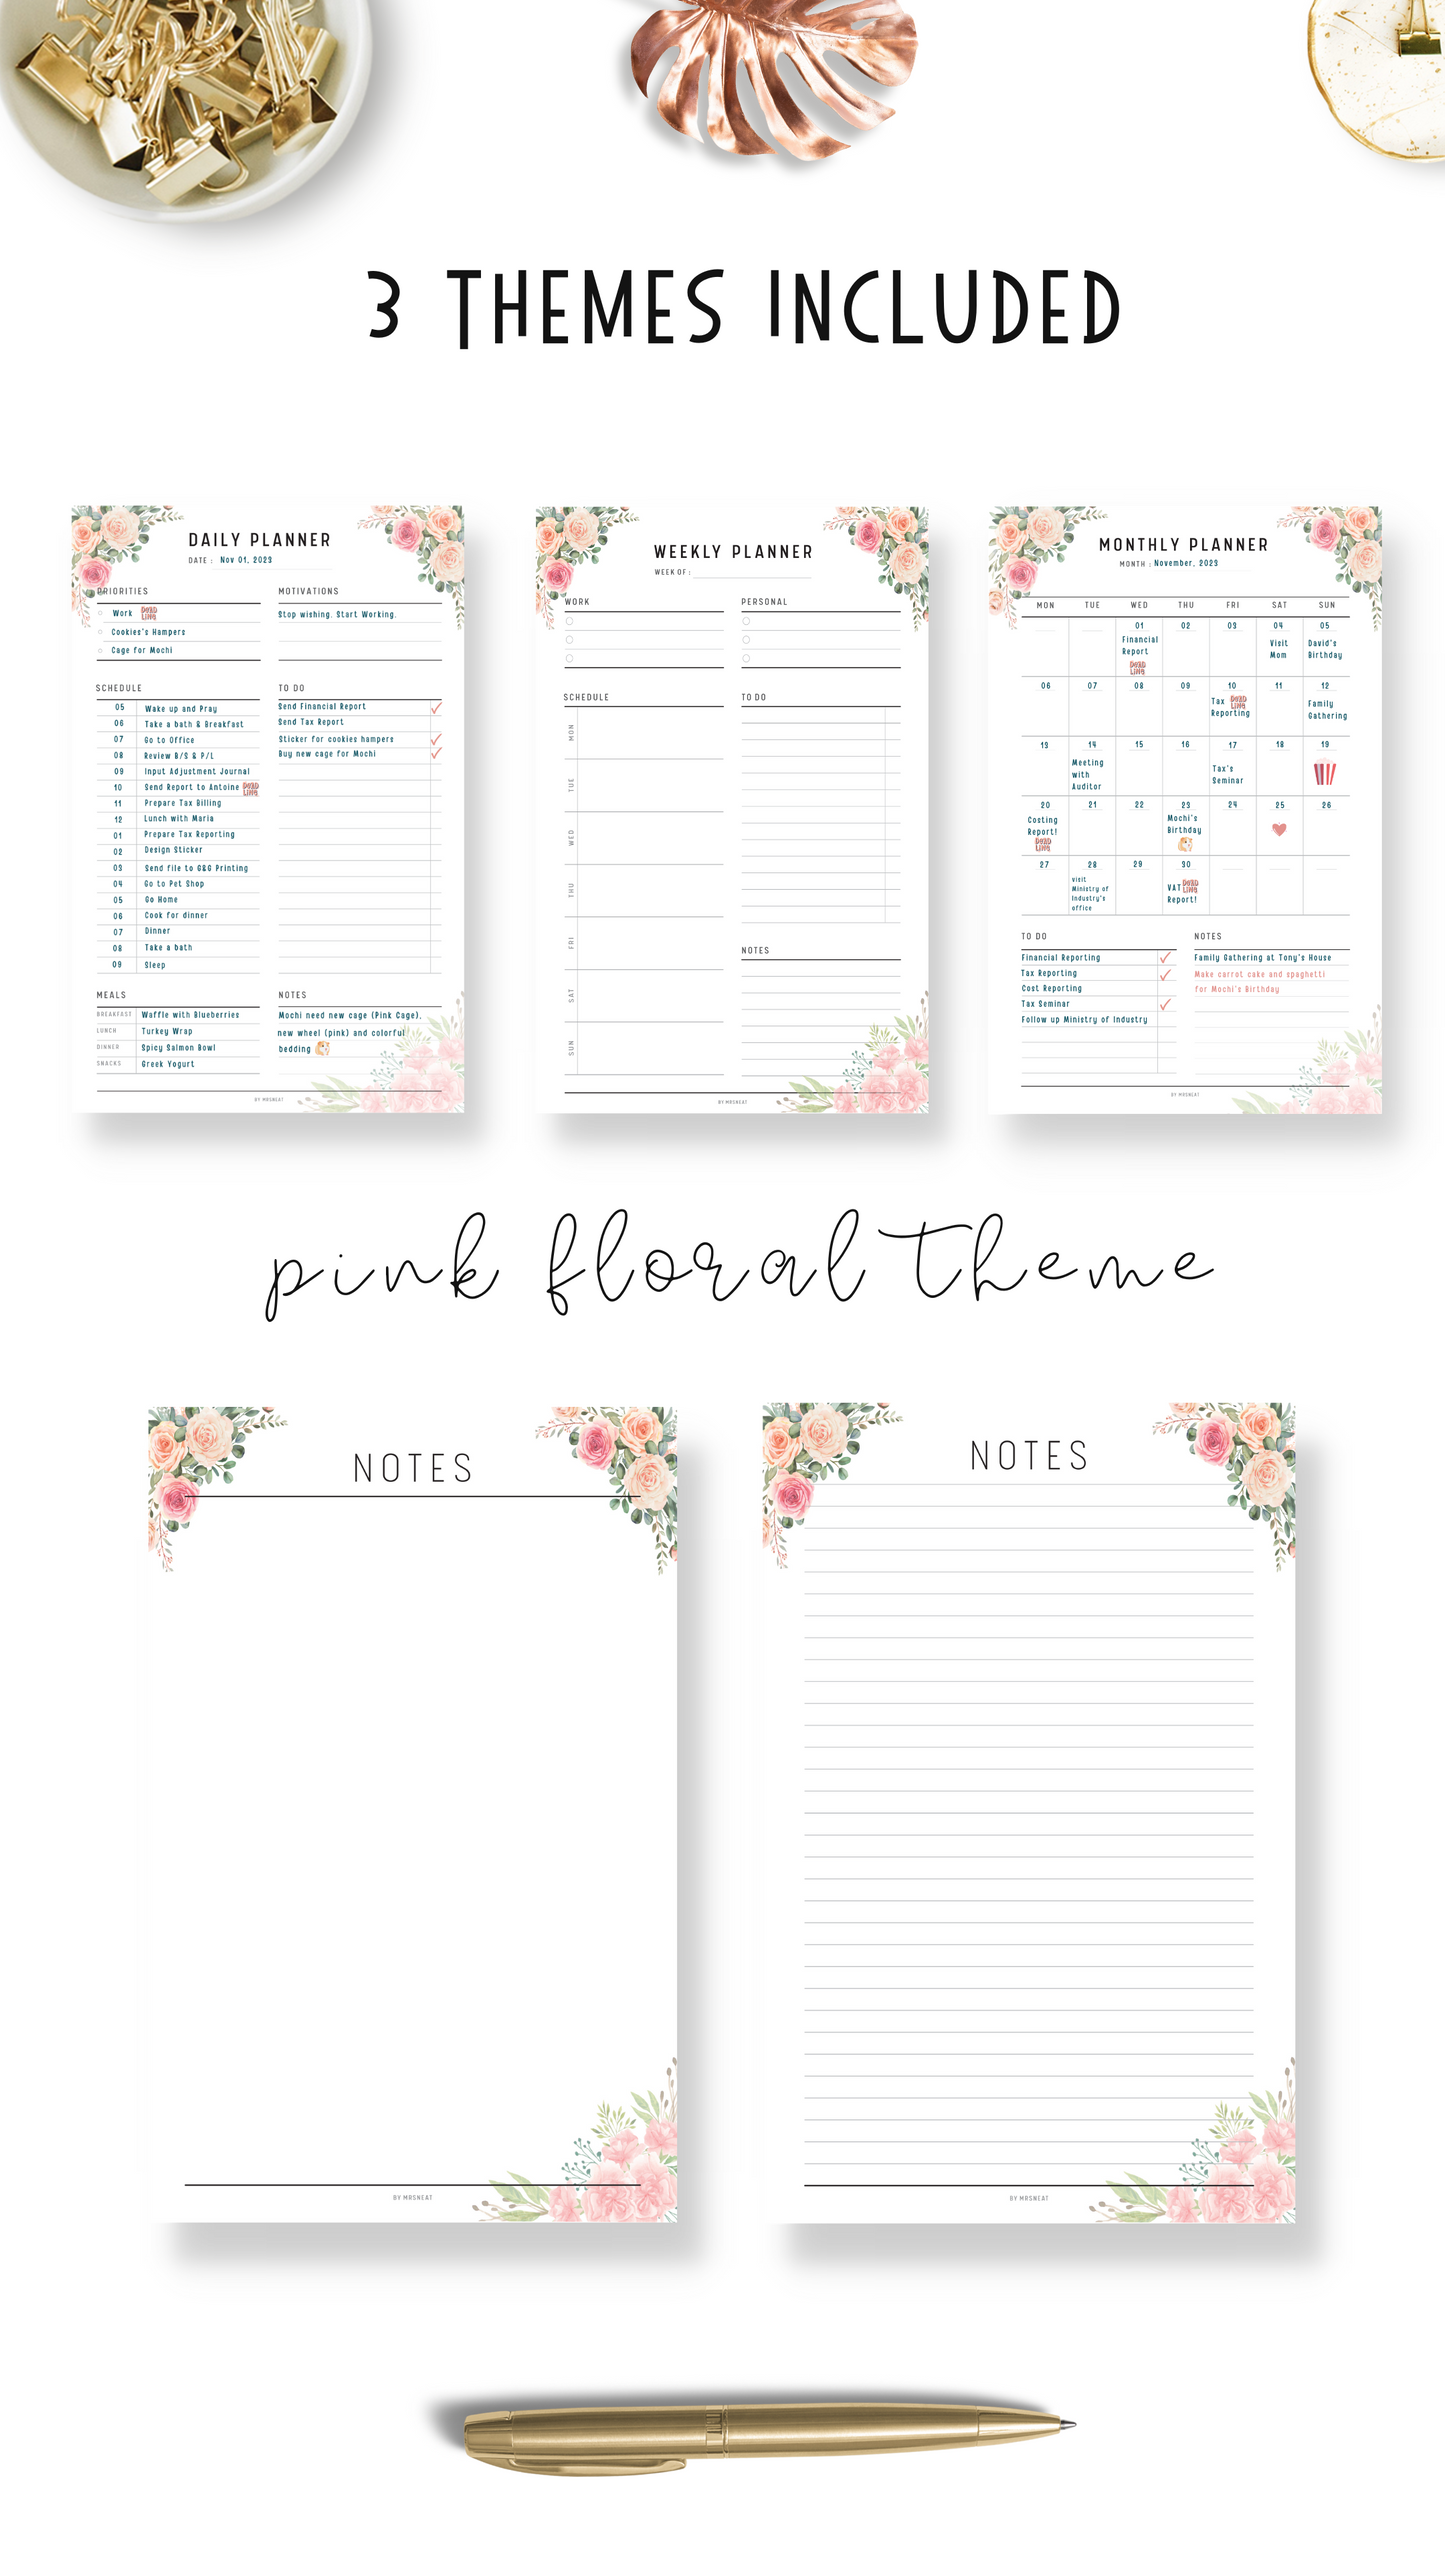 Daily, Weekly, Monthly Planner & Notes Pages